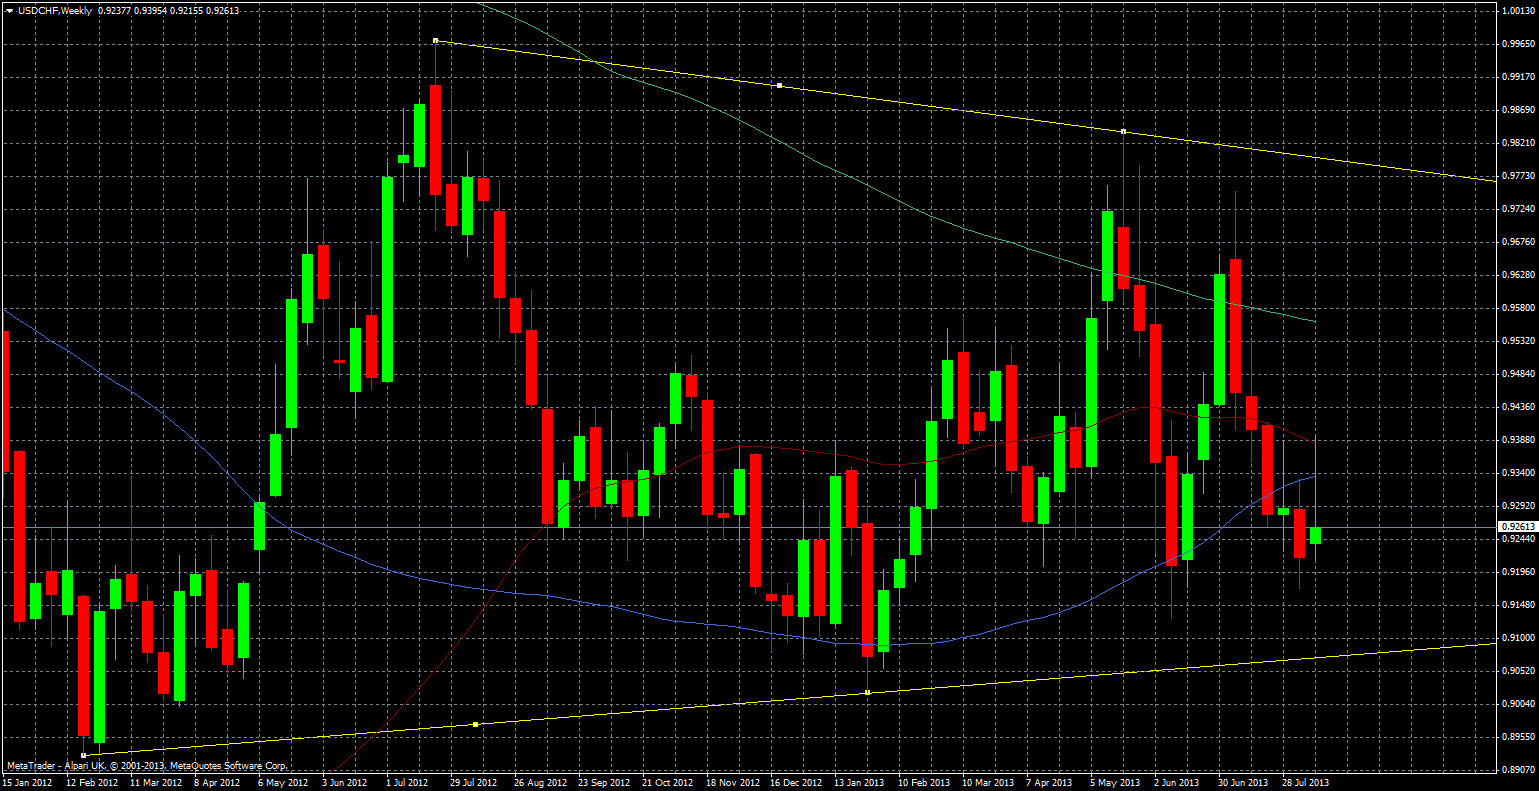 USD/CHF Forex weekly technical analysis chart 16 august 2013 